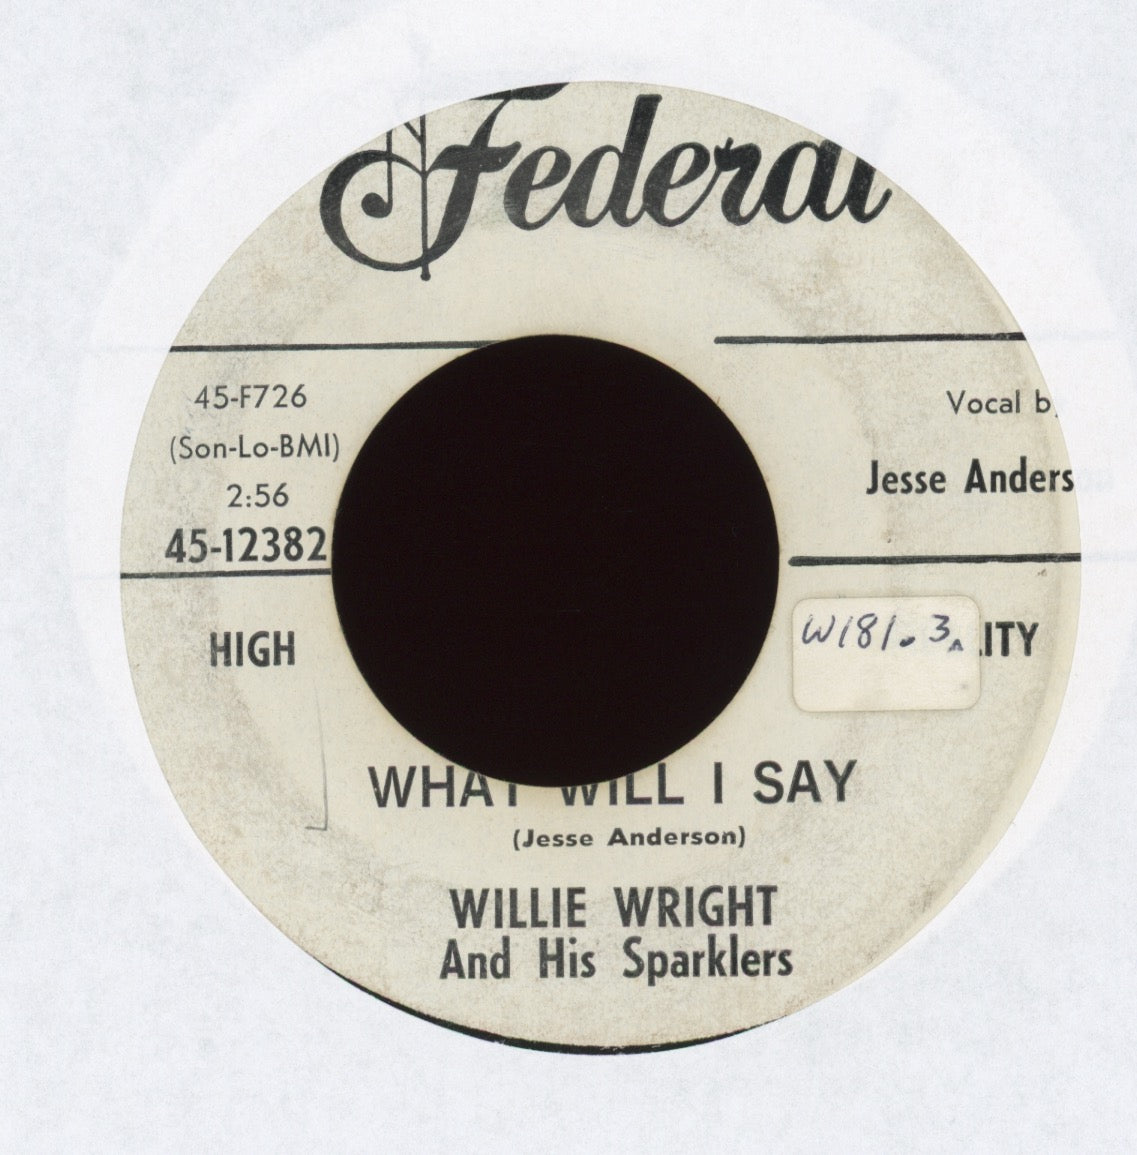 Willie Wright & His Sparklers - Got A Feelin' on Federal Promo